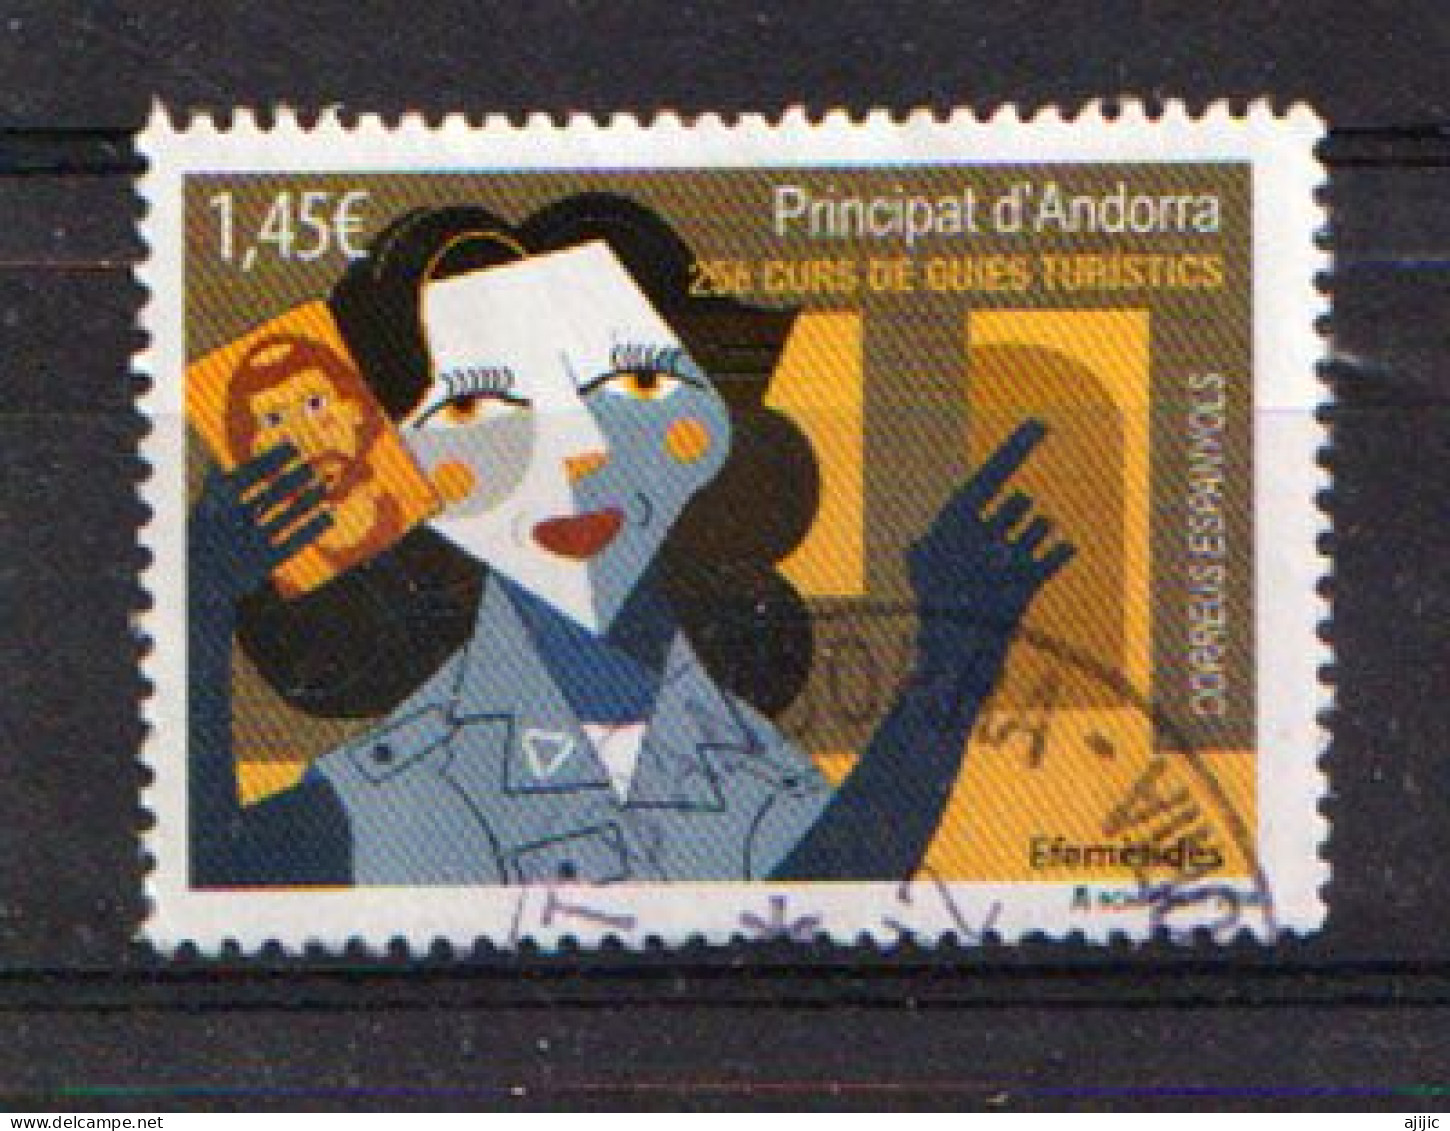 Association Of Tourist Guides Of Andorra, Used Stamp 1 St Quality . High Face Value - Used Stamps